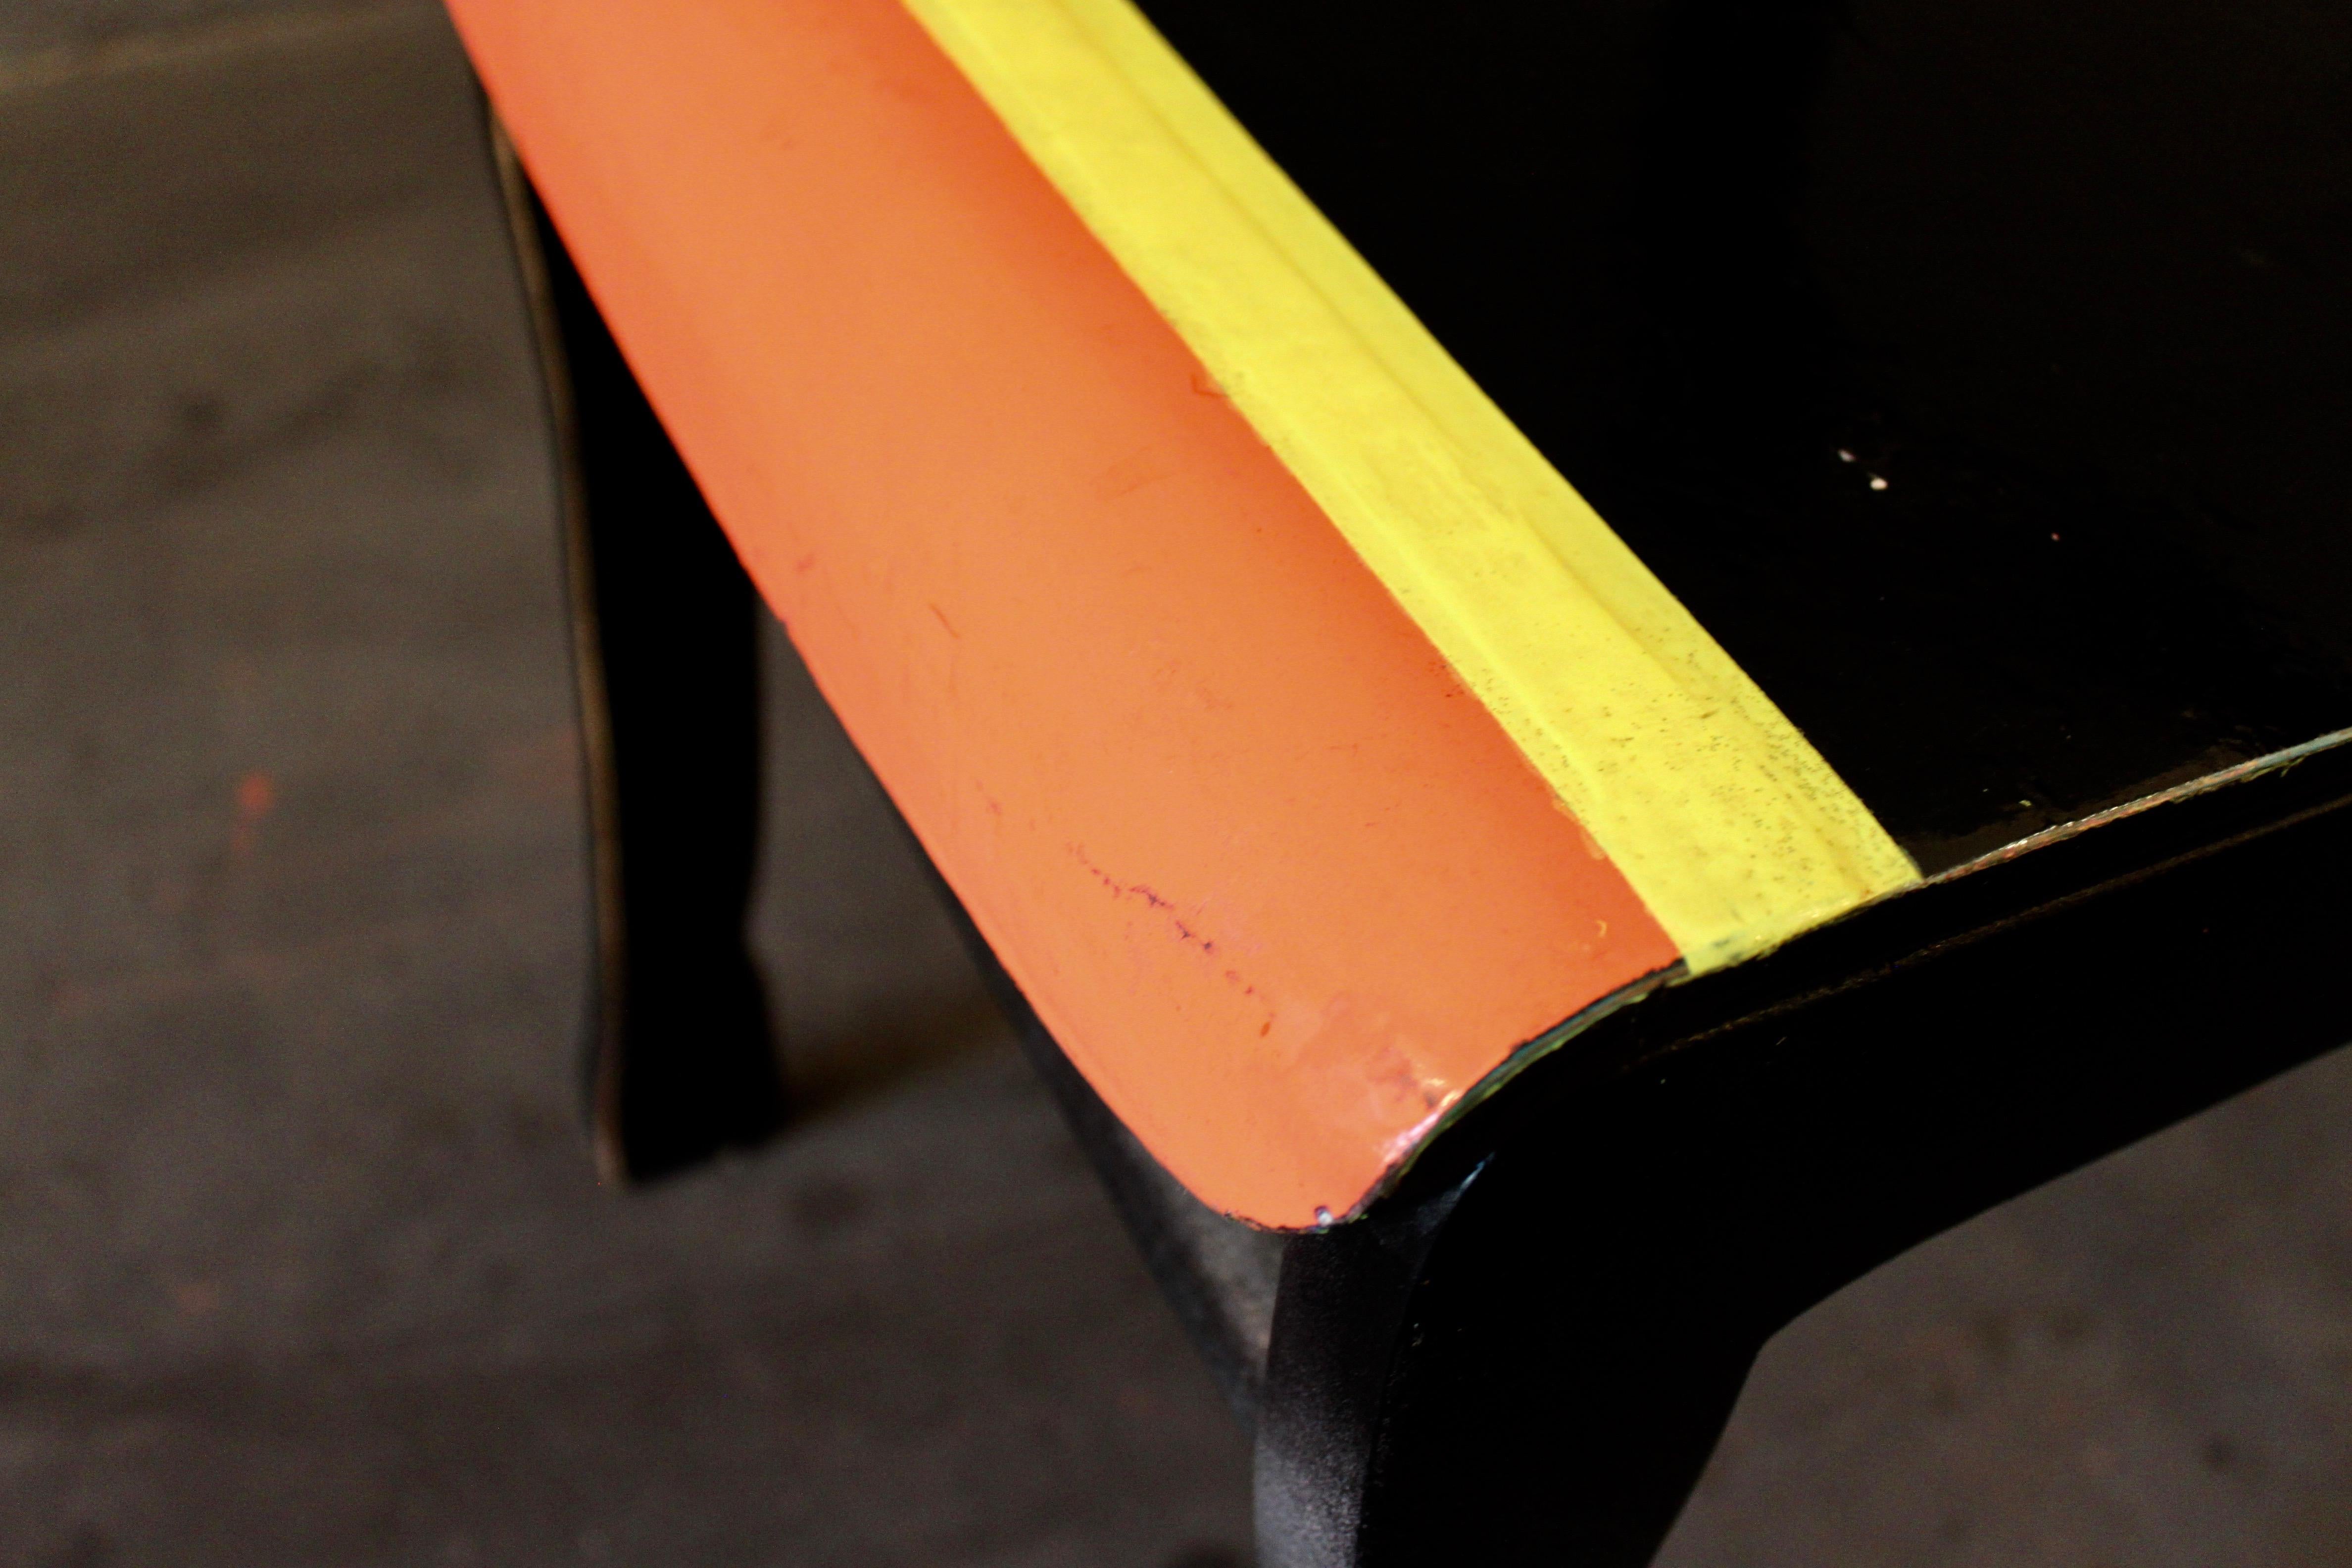 Markus Friedrich Staabs re-work of an early 1970s German design contemporized by re-shaping its original form and mass produced meaning. Painted black with yellow and orange stripes on the seats front, finished with 2K high gloss varnish to preserve